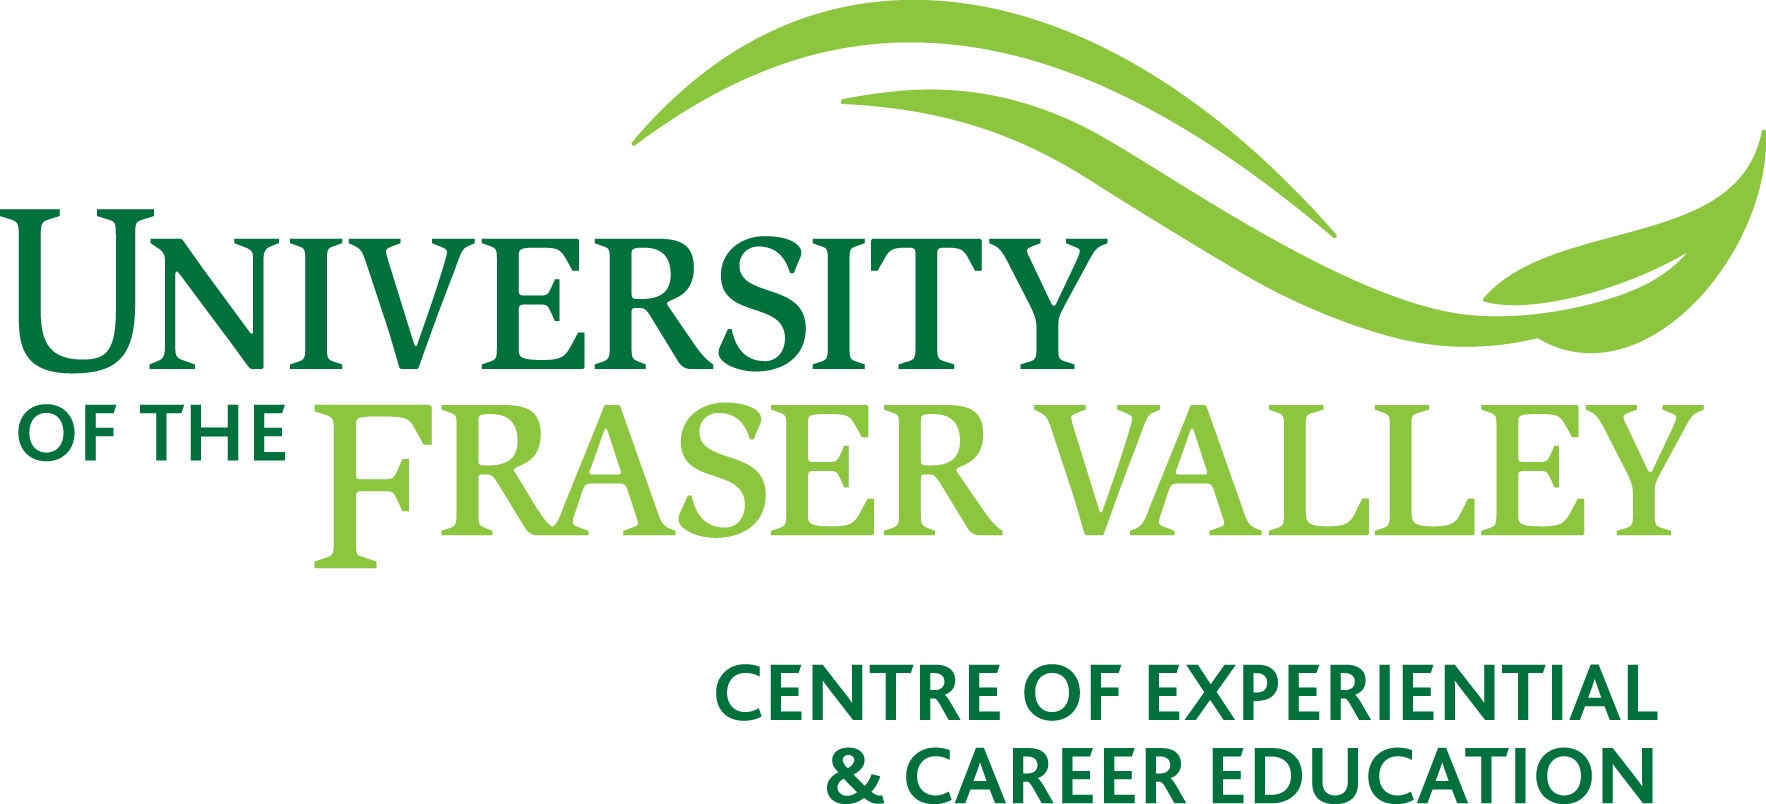 University of the Fraser Valley | Centre of Experiential & Career Education